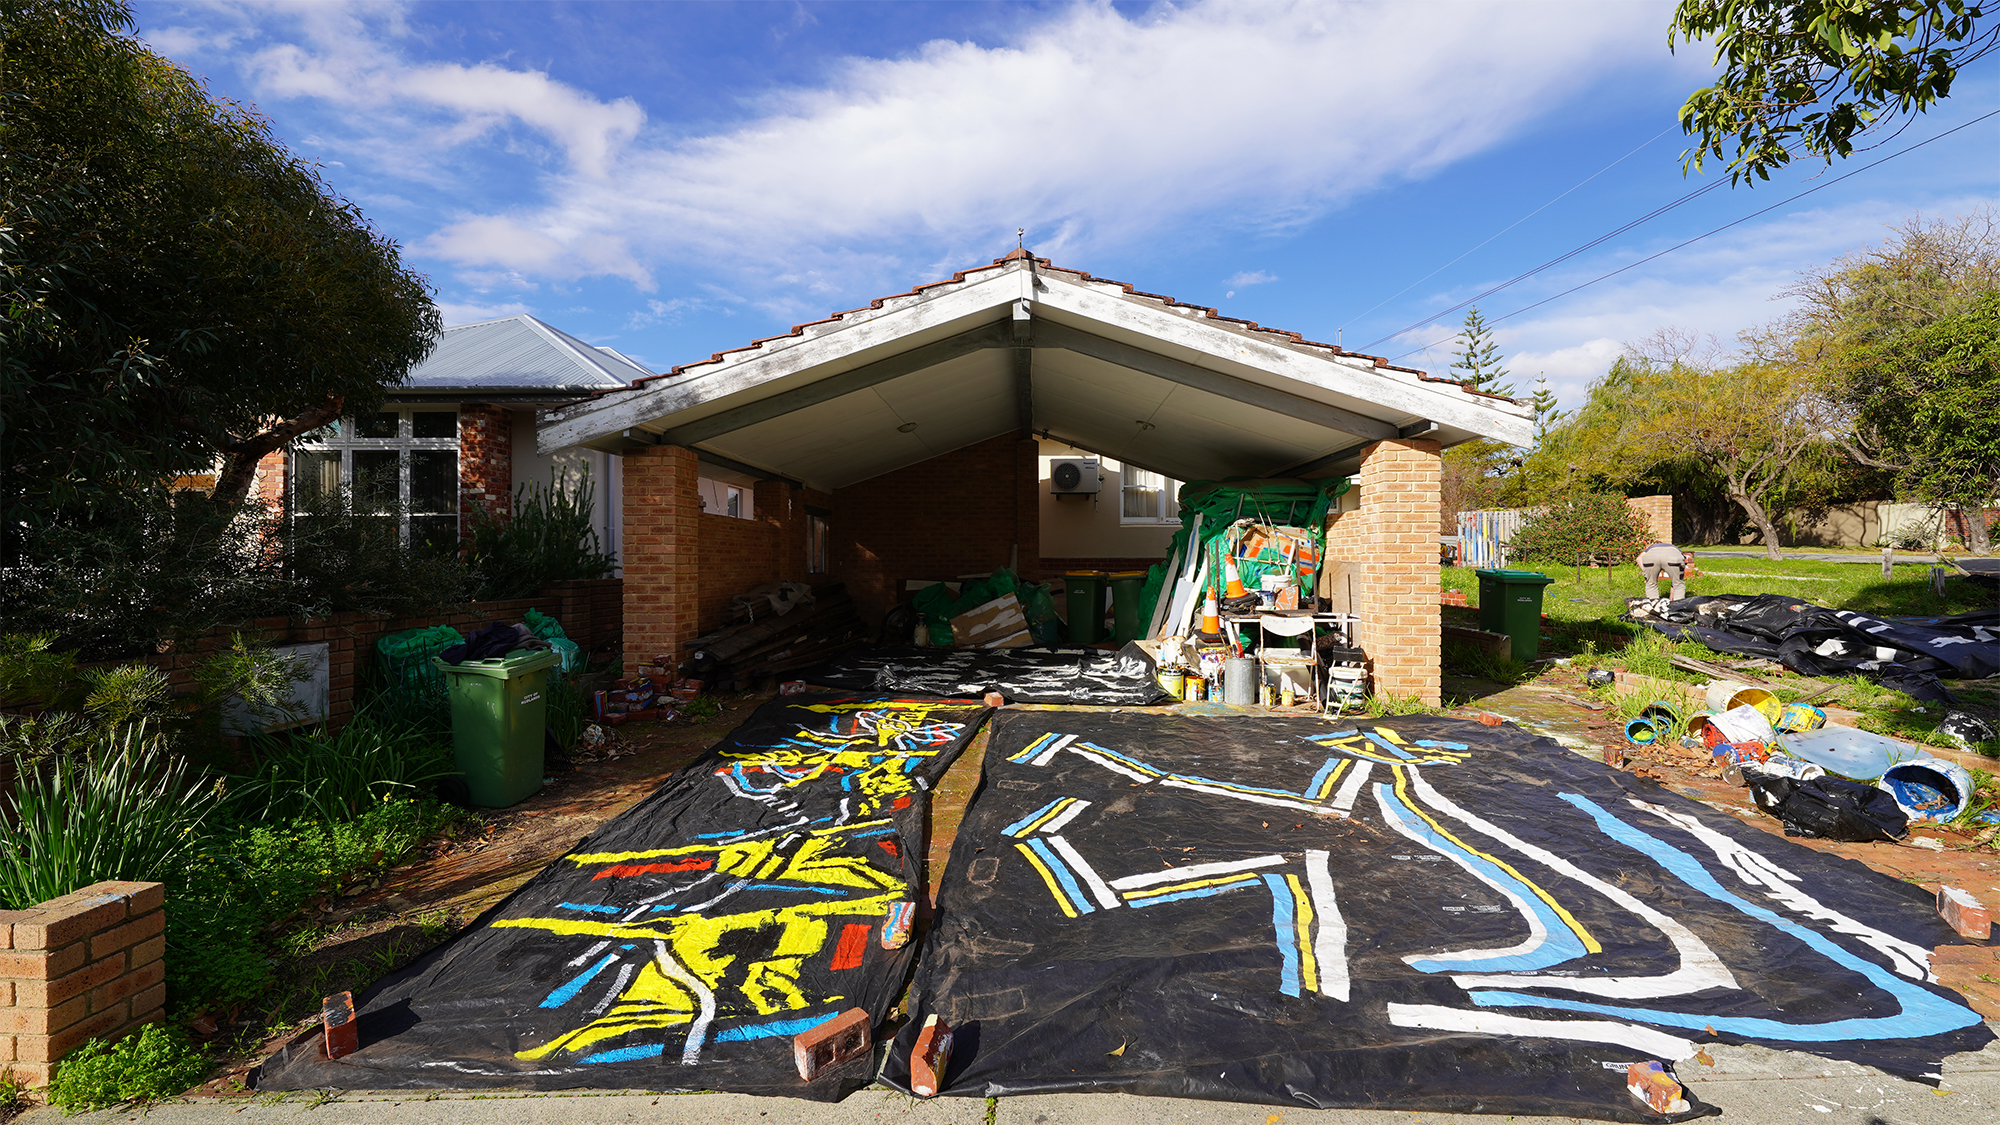 Photograph of a garage with two large plastic paintings spread out on the driveway and an array of paint materials and supplies scattered around